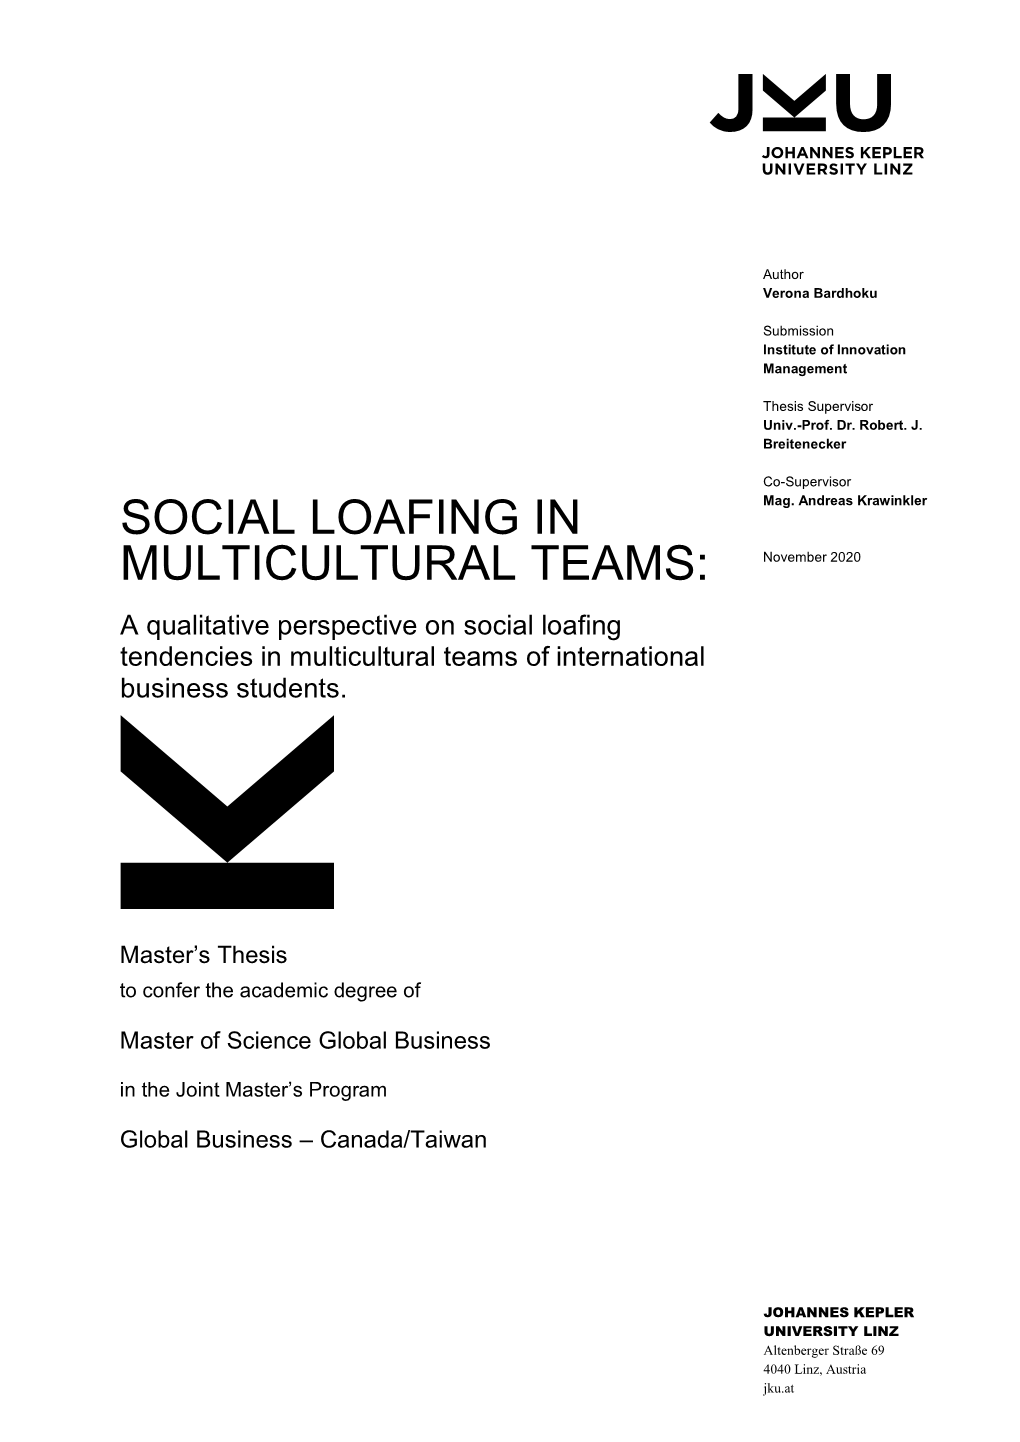 Social Loafing in Multicultural Teams